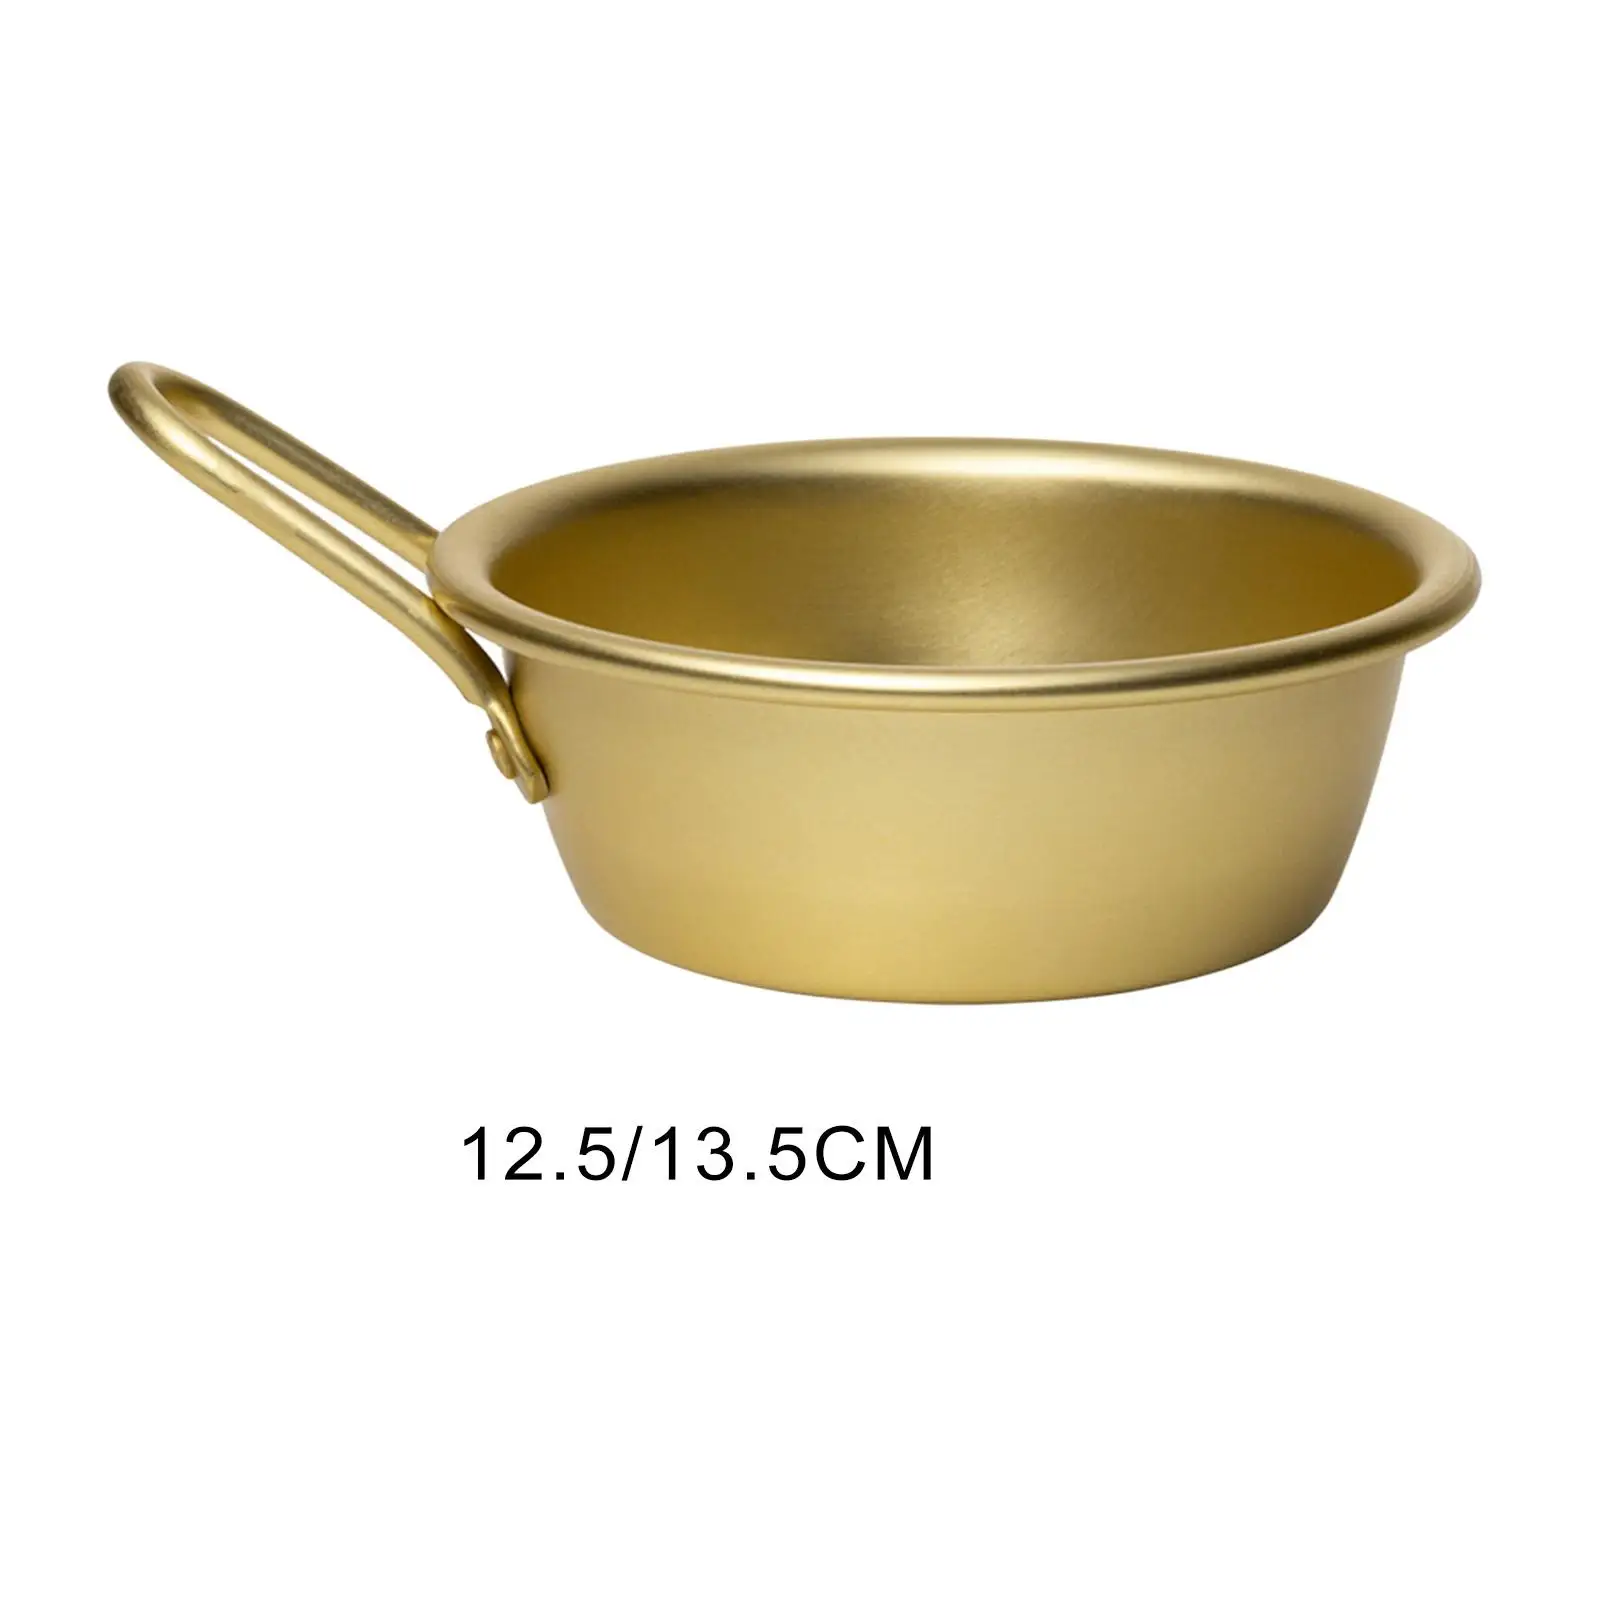 Korean Traditional Wine Bowl Golden with Handle Rice Wine Bowl Wine Cup Hiking Soup Dish Aluminum Cup Ramen Noodles Pot Camping